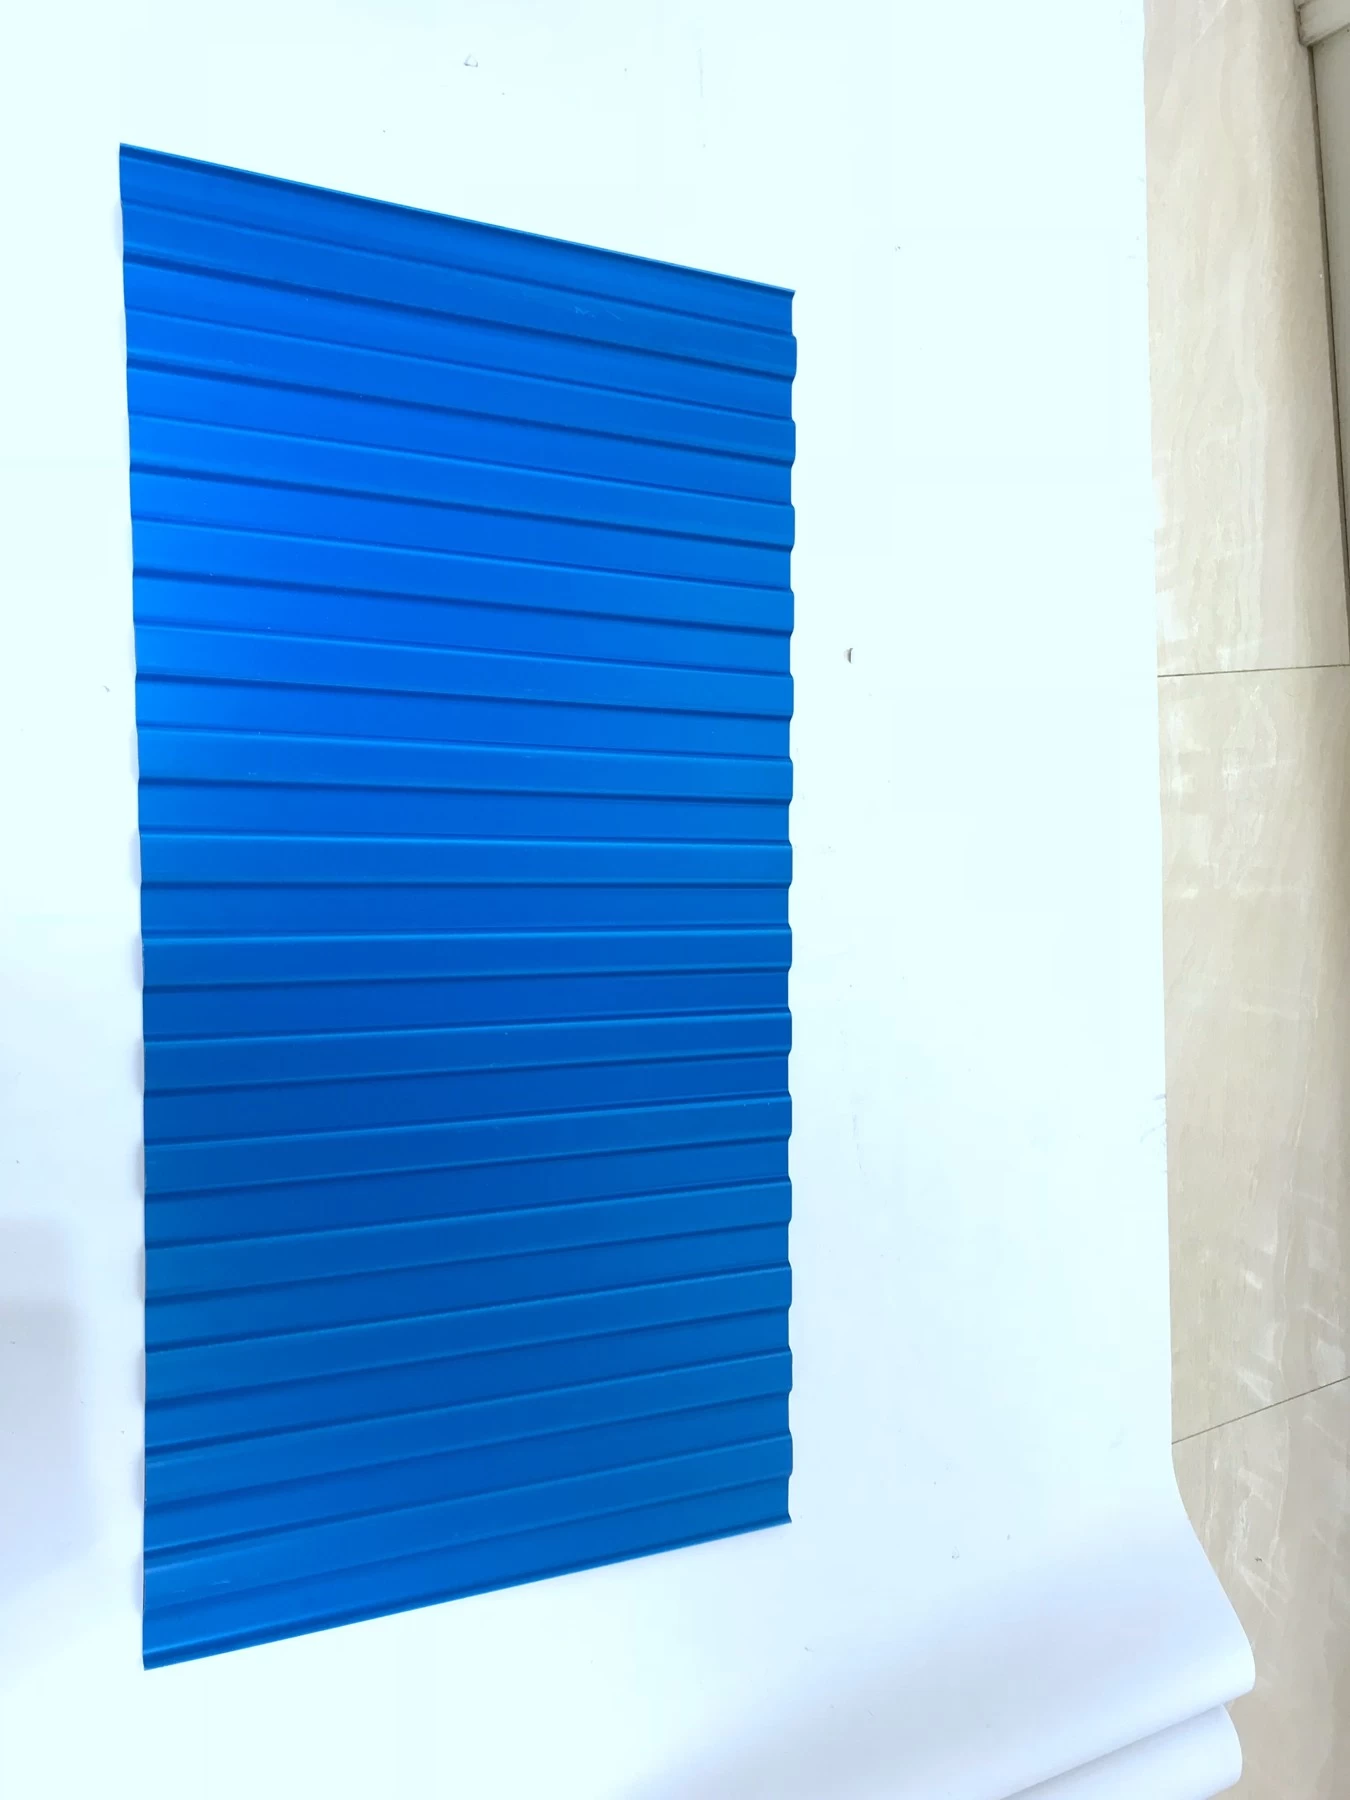 China supplier excellent sound insulation ASA-PVC plastic roofing wall sheet